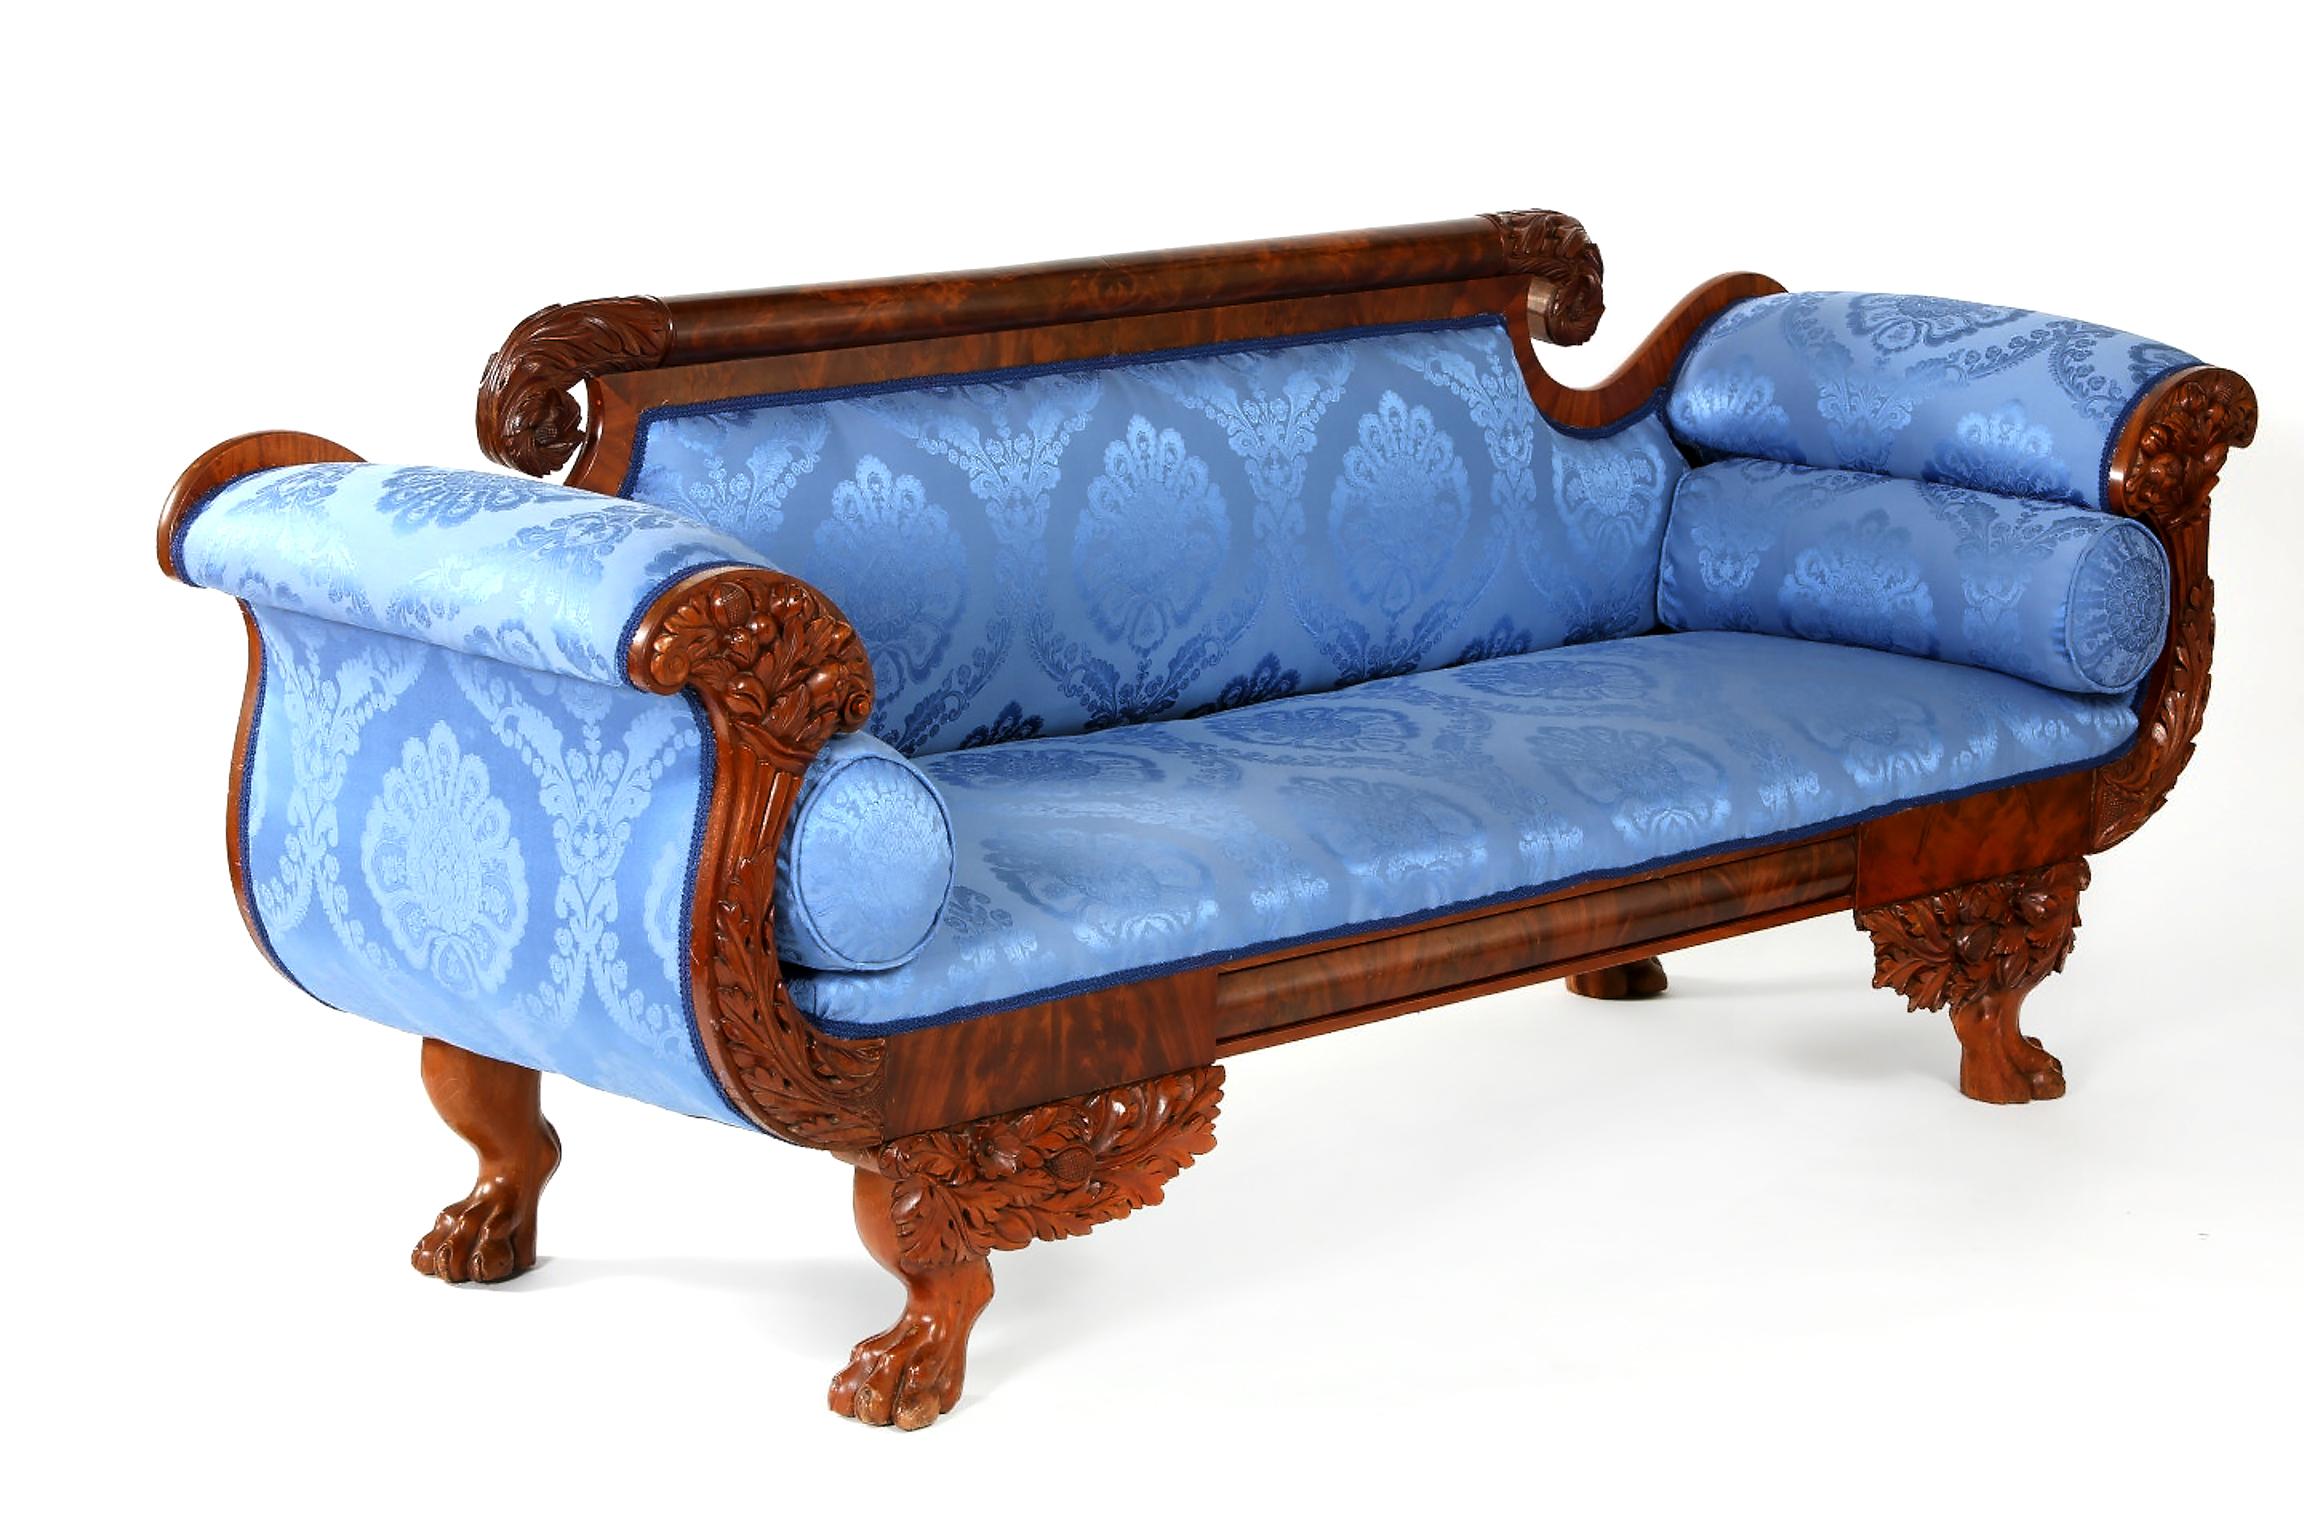 Empire style mahogany wood framed hand carved scroll arm sofa. The sofa is very sturdy and in good condition with wear consistent with age / use. The upholstery is very immaculate. The sofa is about 86 inches long x 23 inches wide x 30 inches high.